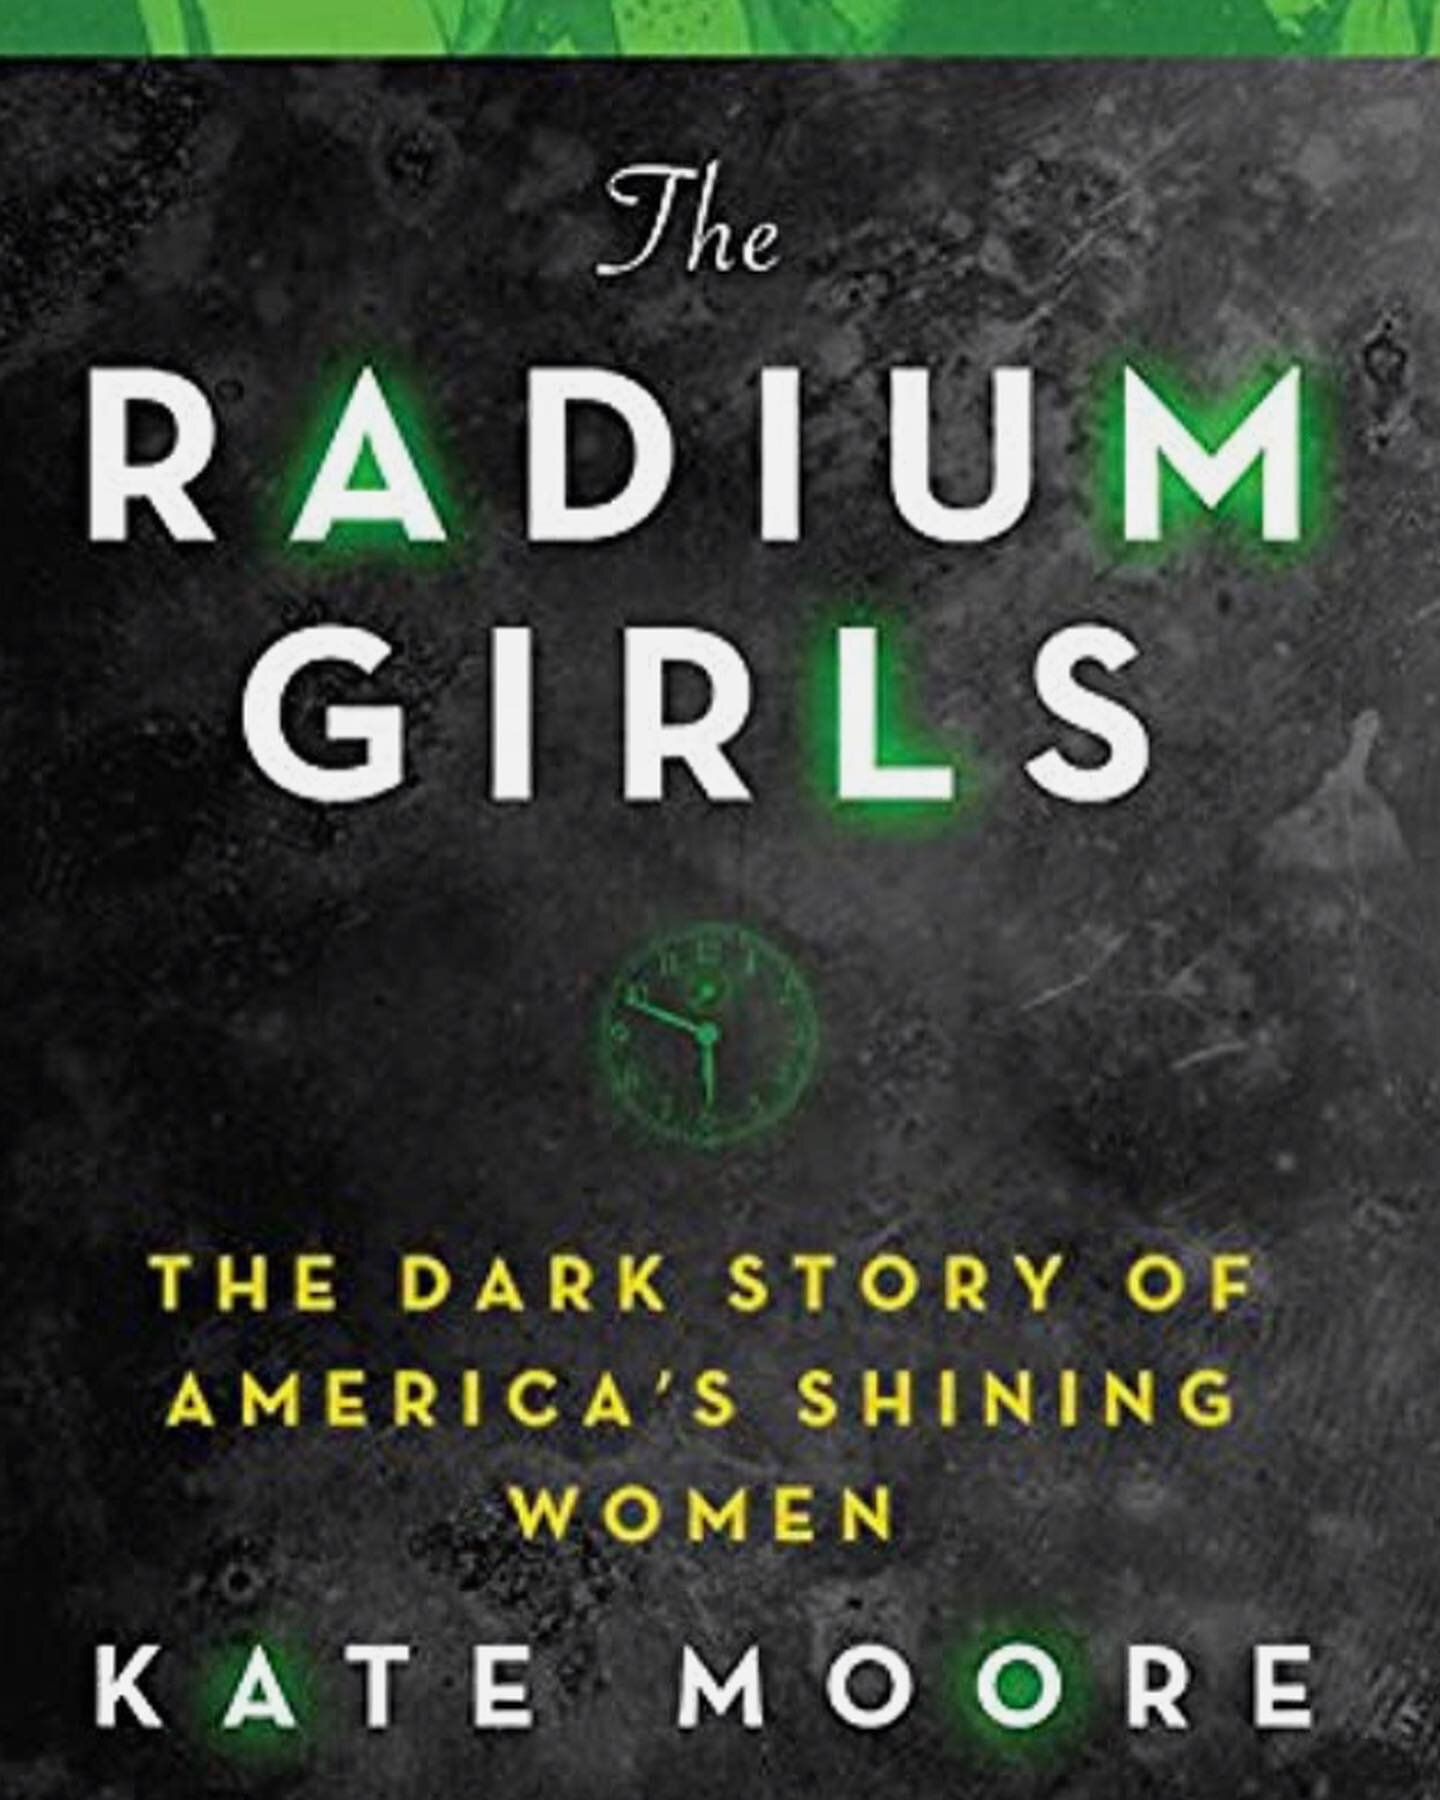 Last night I finished The Radium Girls by Kate Moore. It's a heroic tale that showcases the power women have when they stand up together to fight systems that are stacked up against them. These women refused to give up after decades of dishonesty and